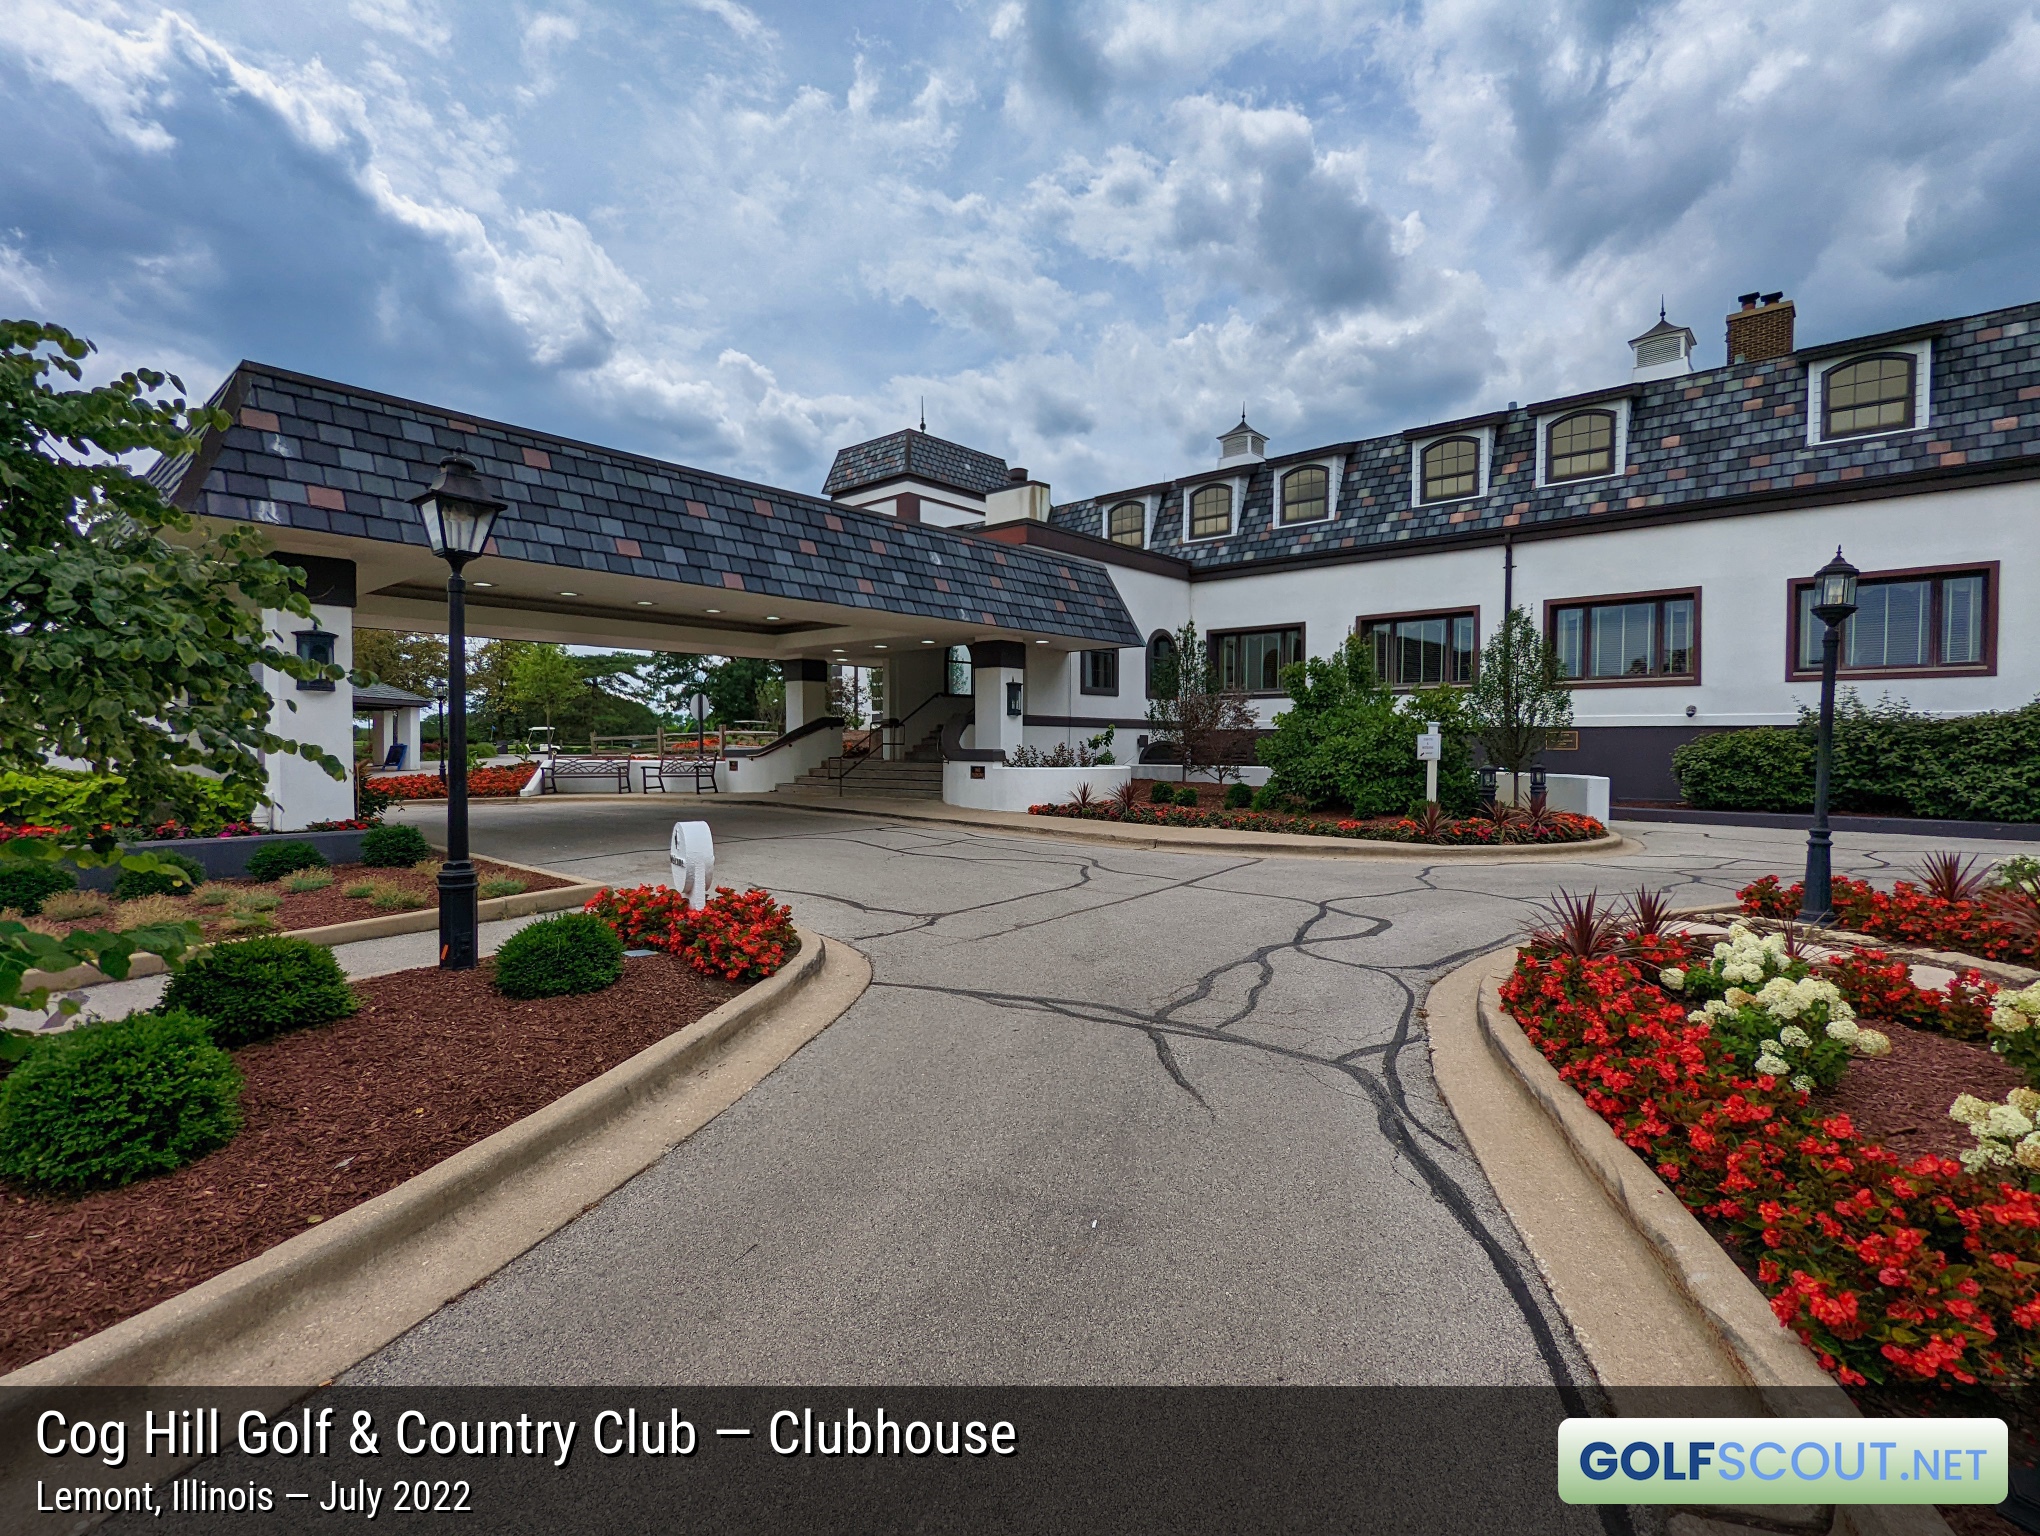 Photo of the clubhouse at Cog Hill Course #1 in Lemont, Illinois. The main clubhouse building at Cog Hill, from the driveway angle.